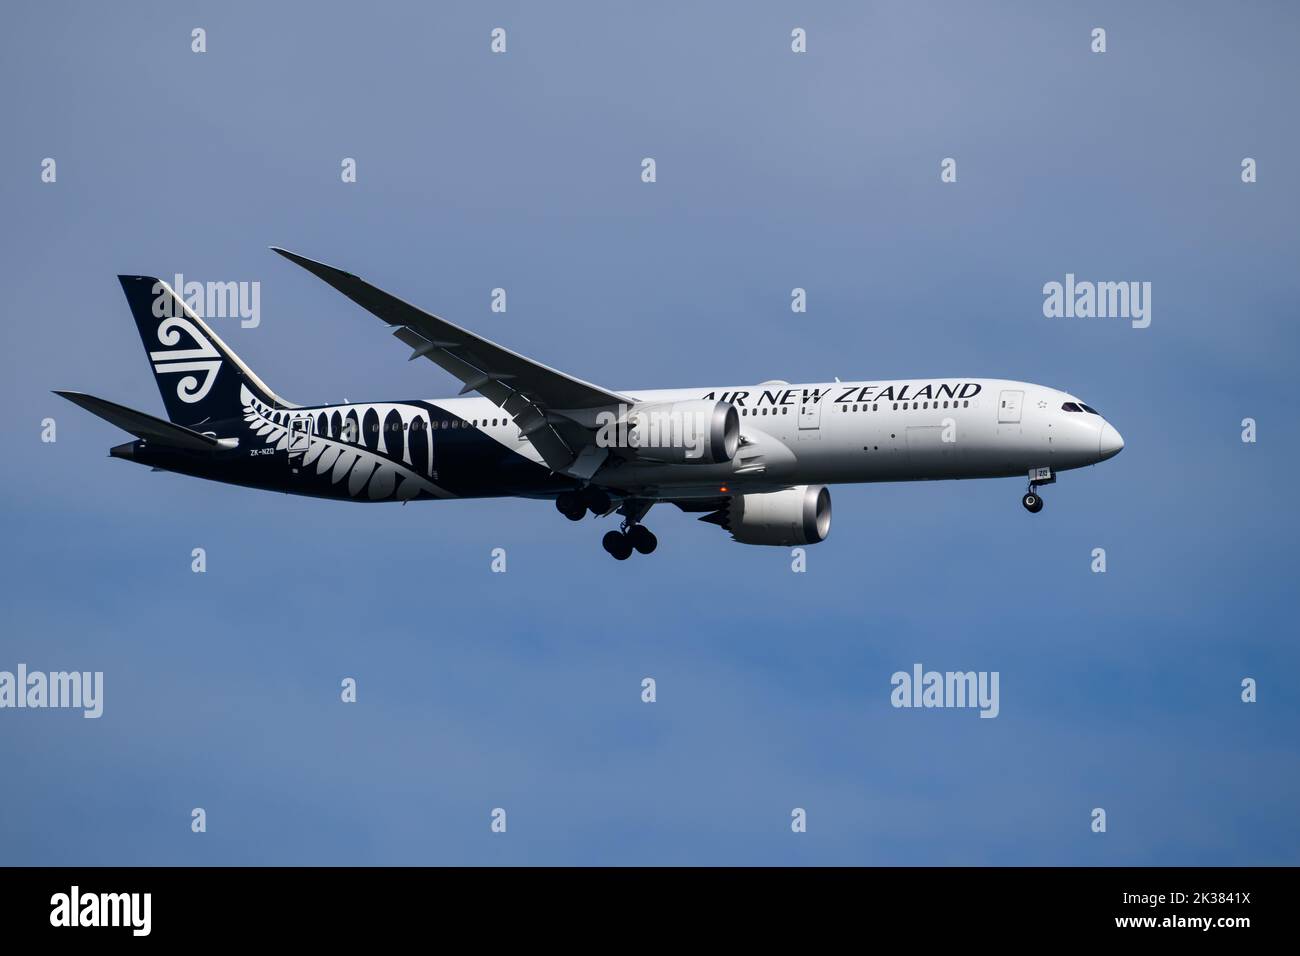 Air New Zealand Airlines Boeing B787 Dreamliner Arriving at Sydney Airport Stock Photo